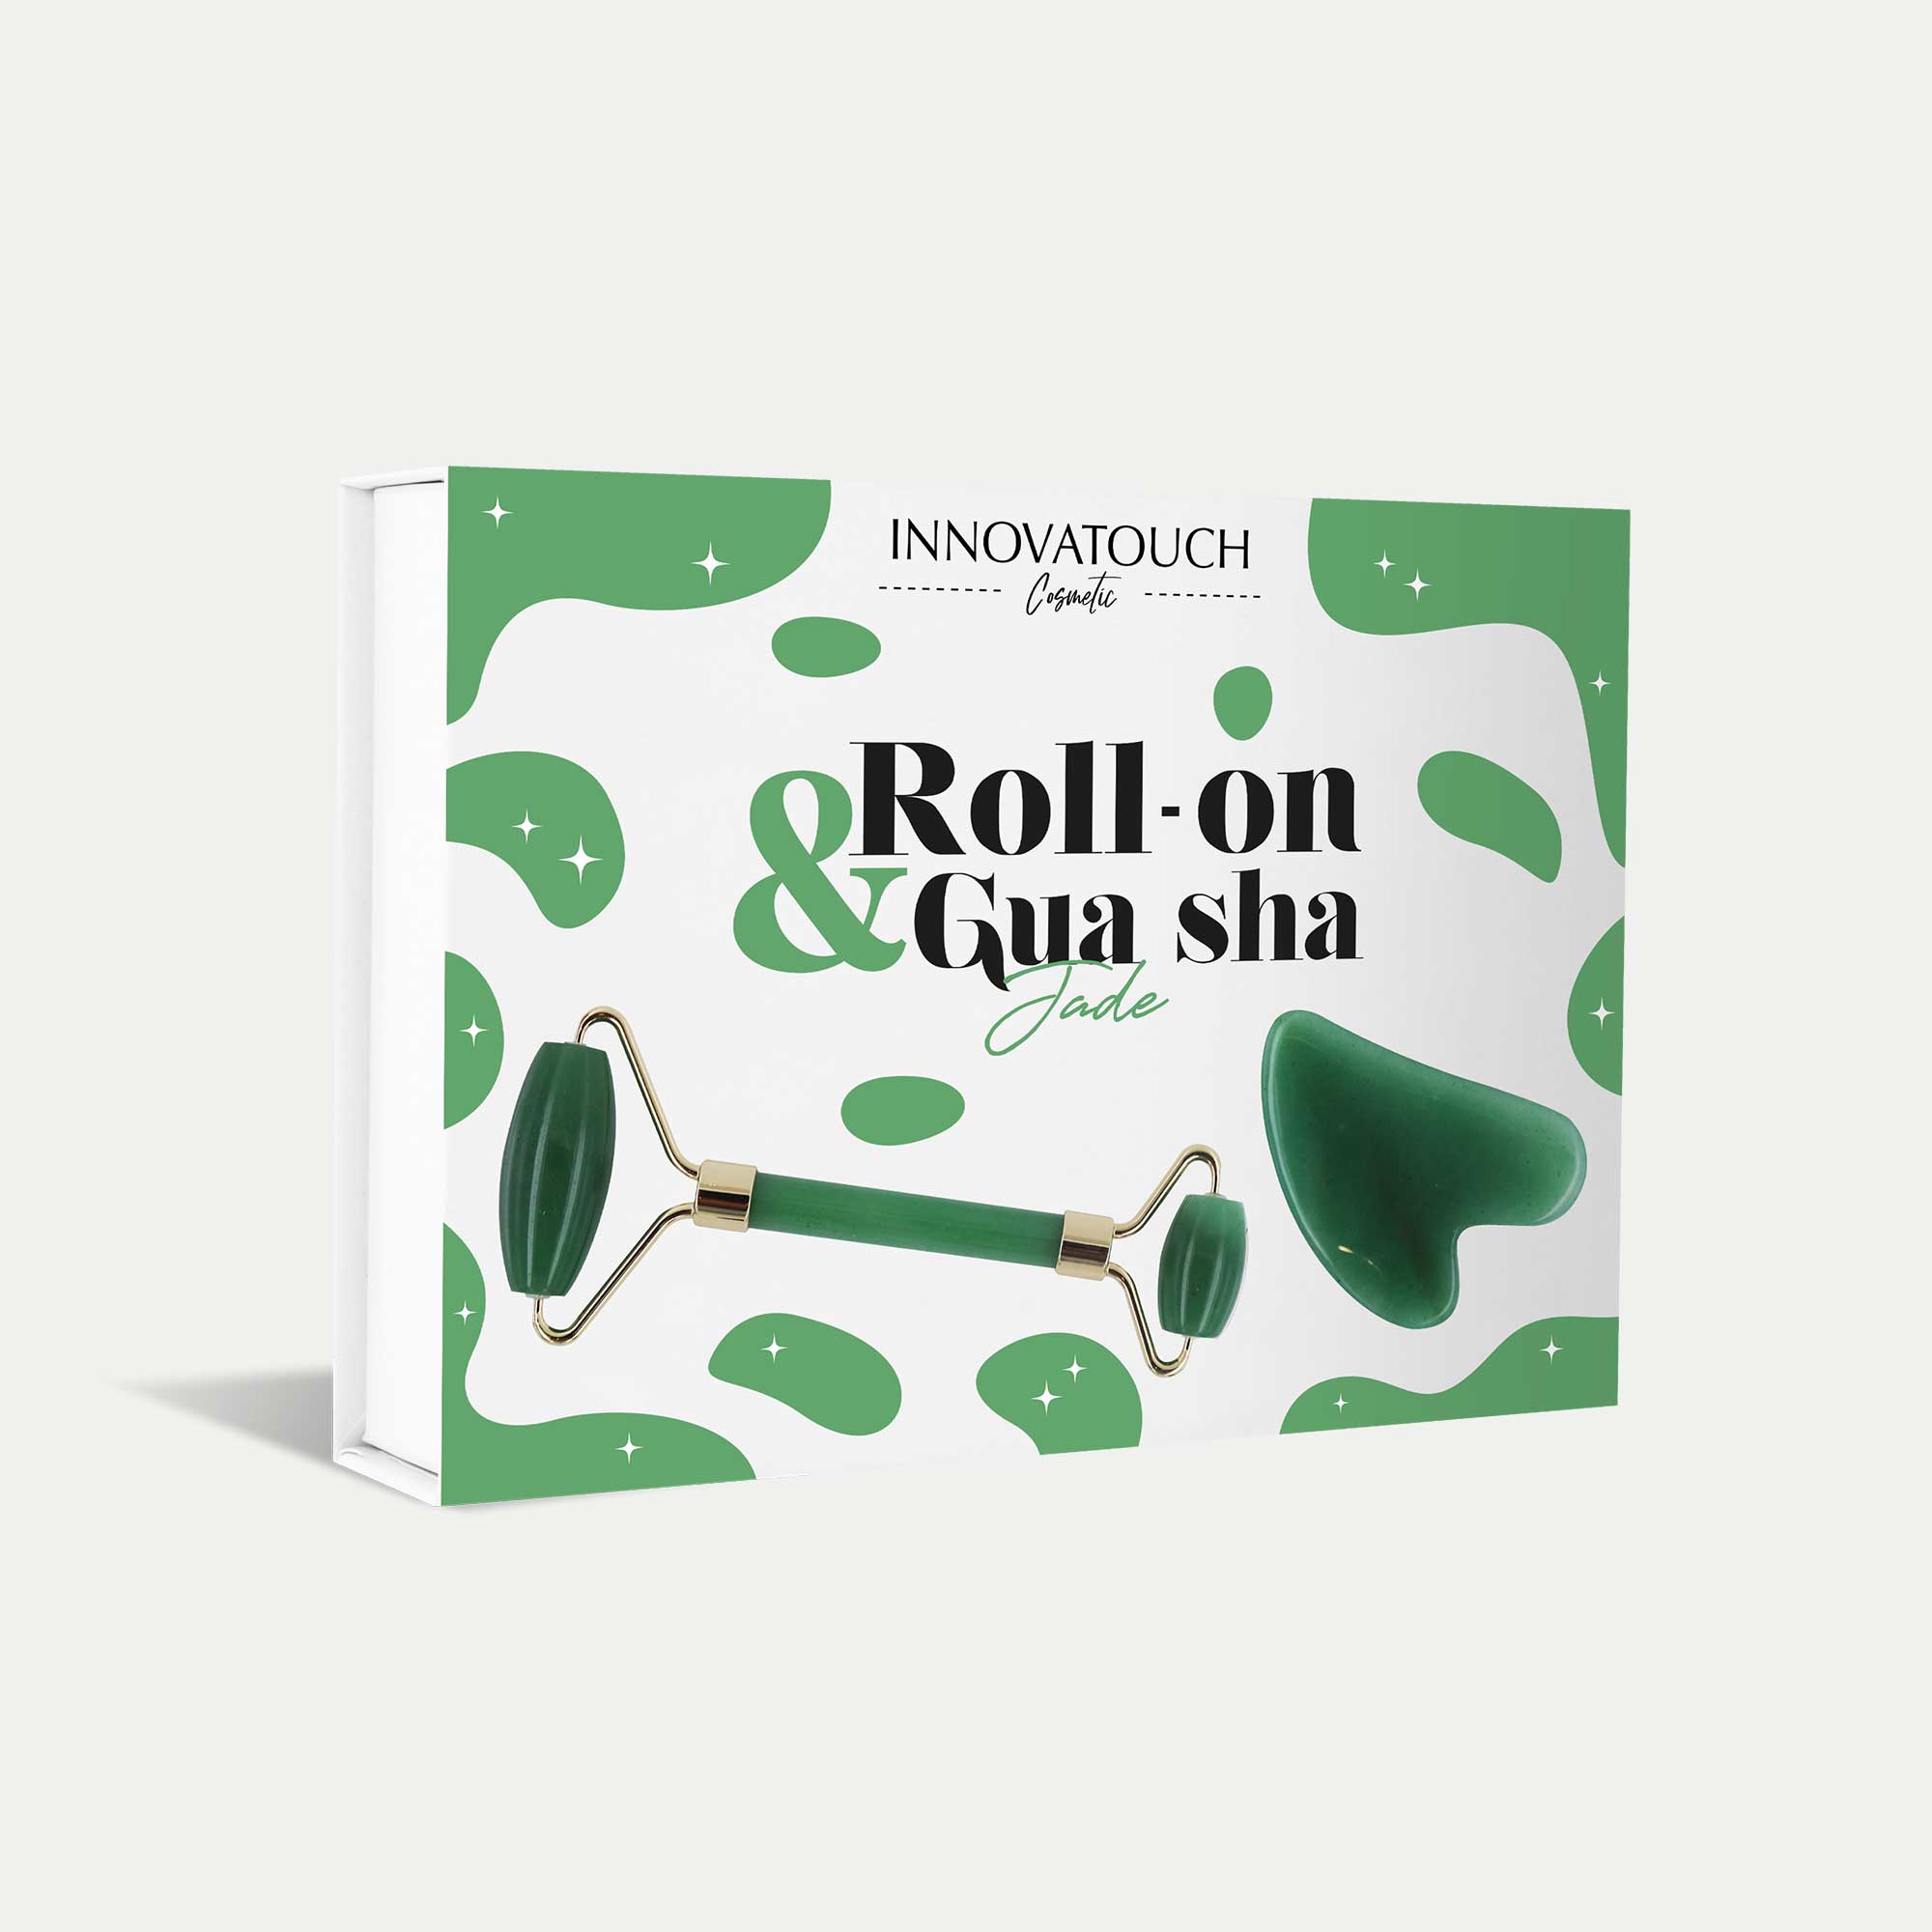 COFFRET-roll-on-jade-1-cadeaux-innovatouch-cosmetic